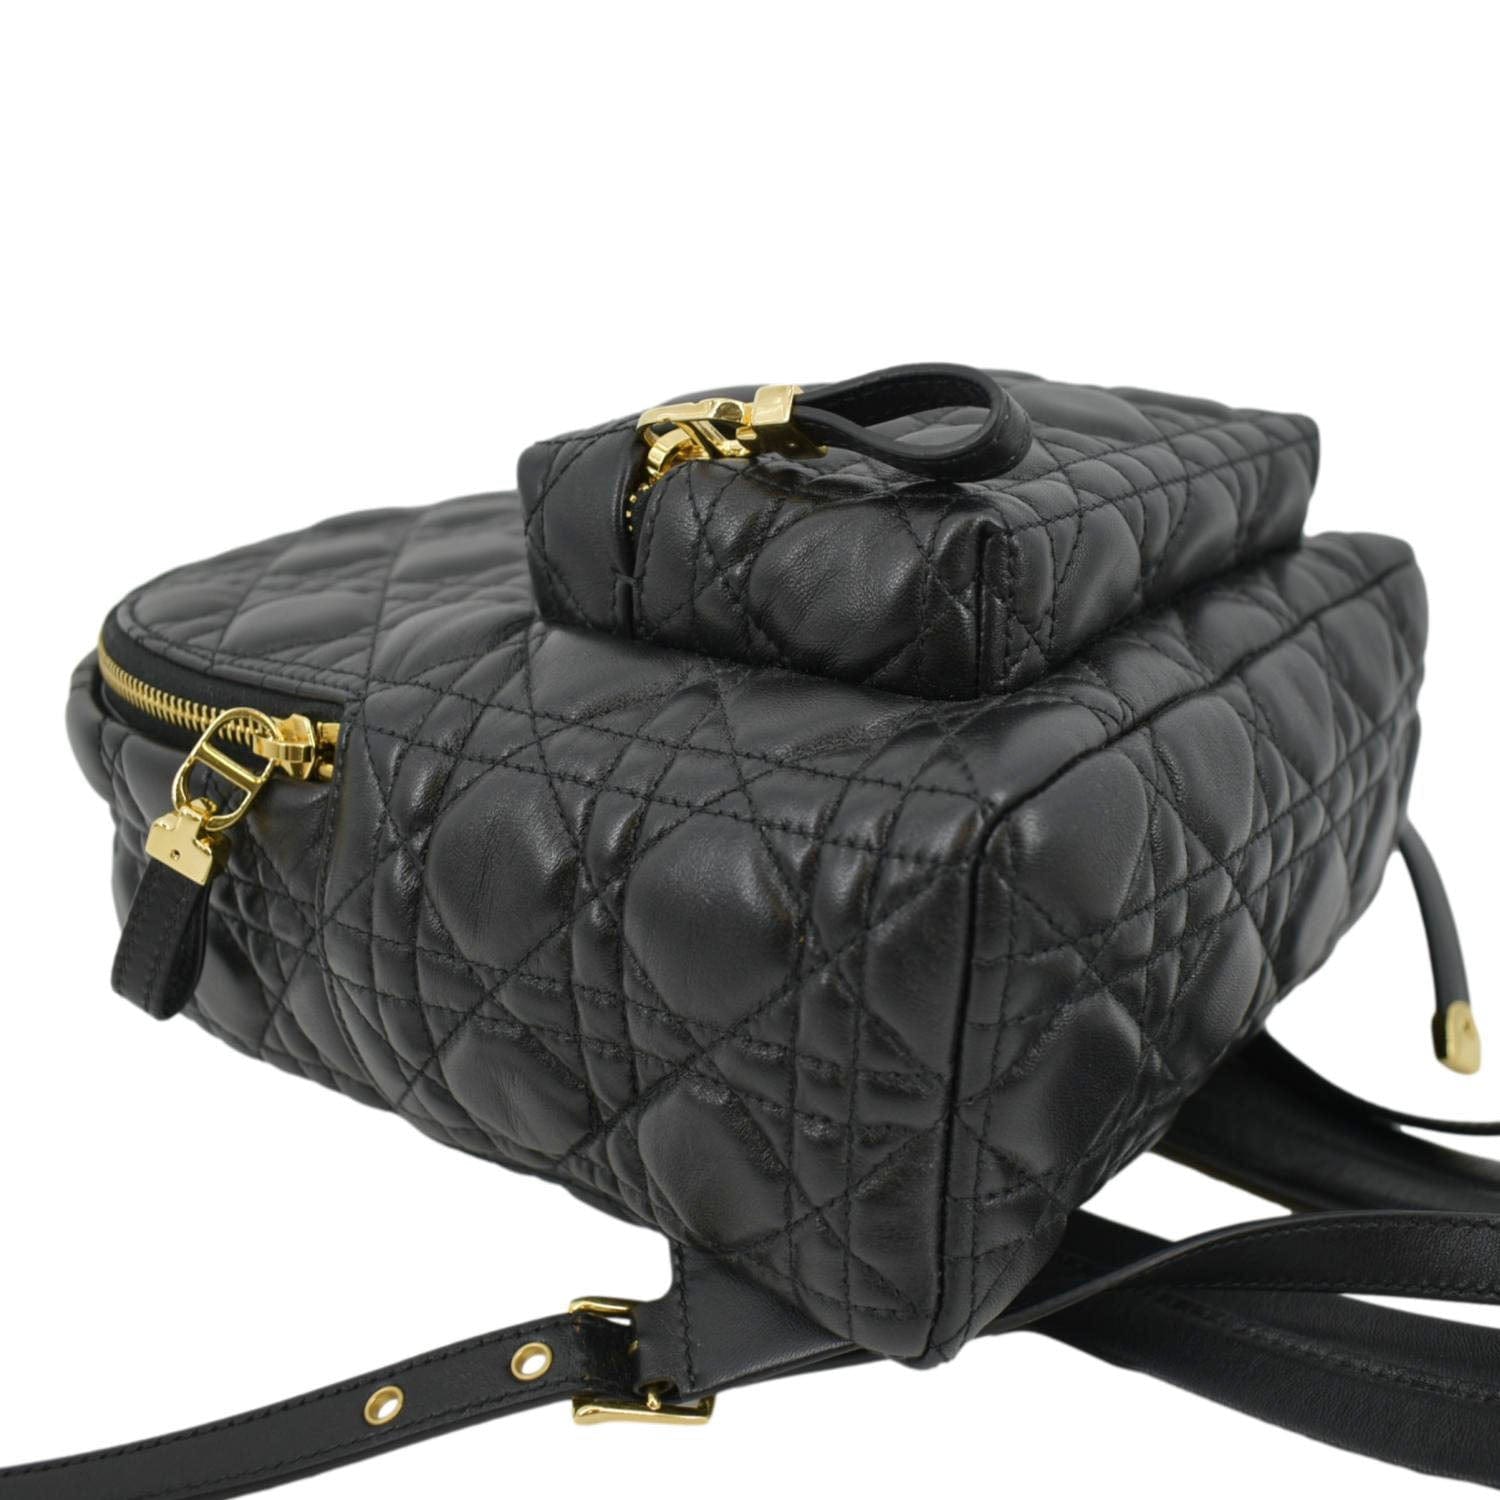 CHRISTIAN DIOR Cannage Quilted Leather Backpack Black